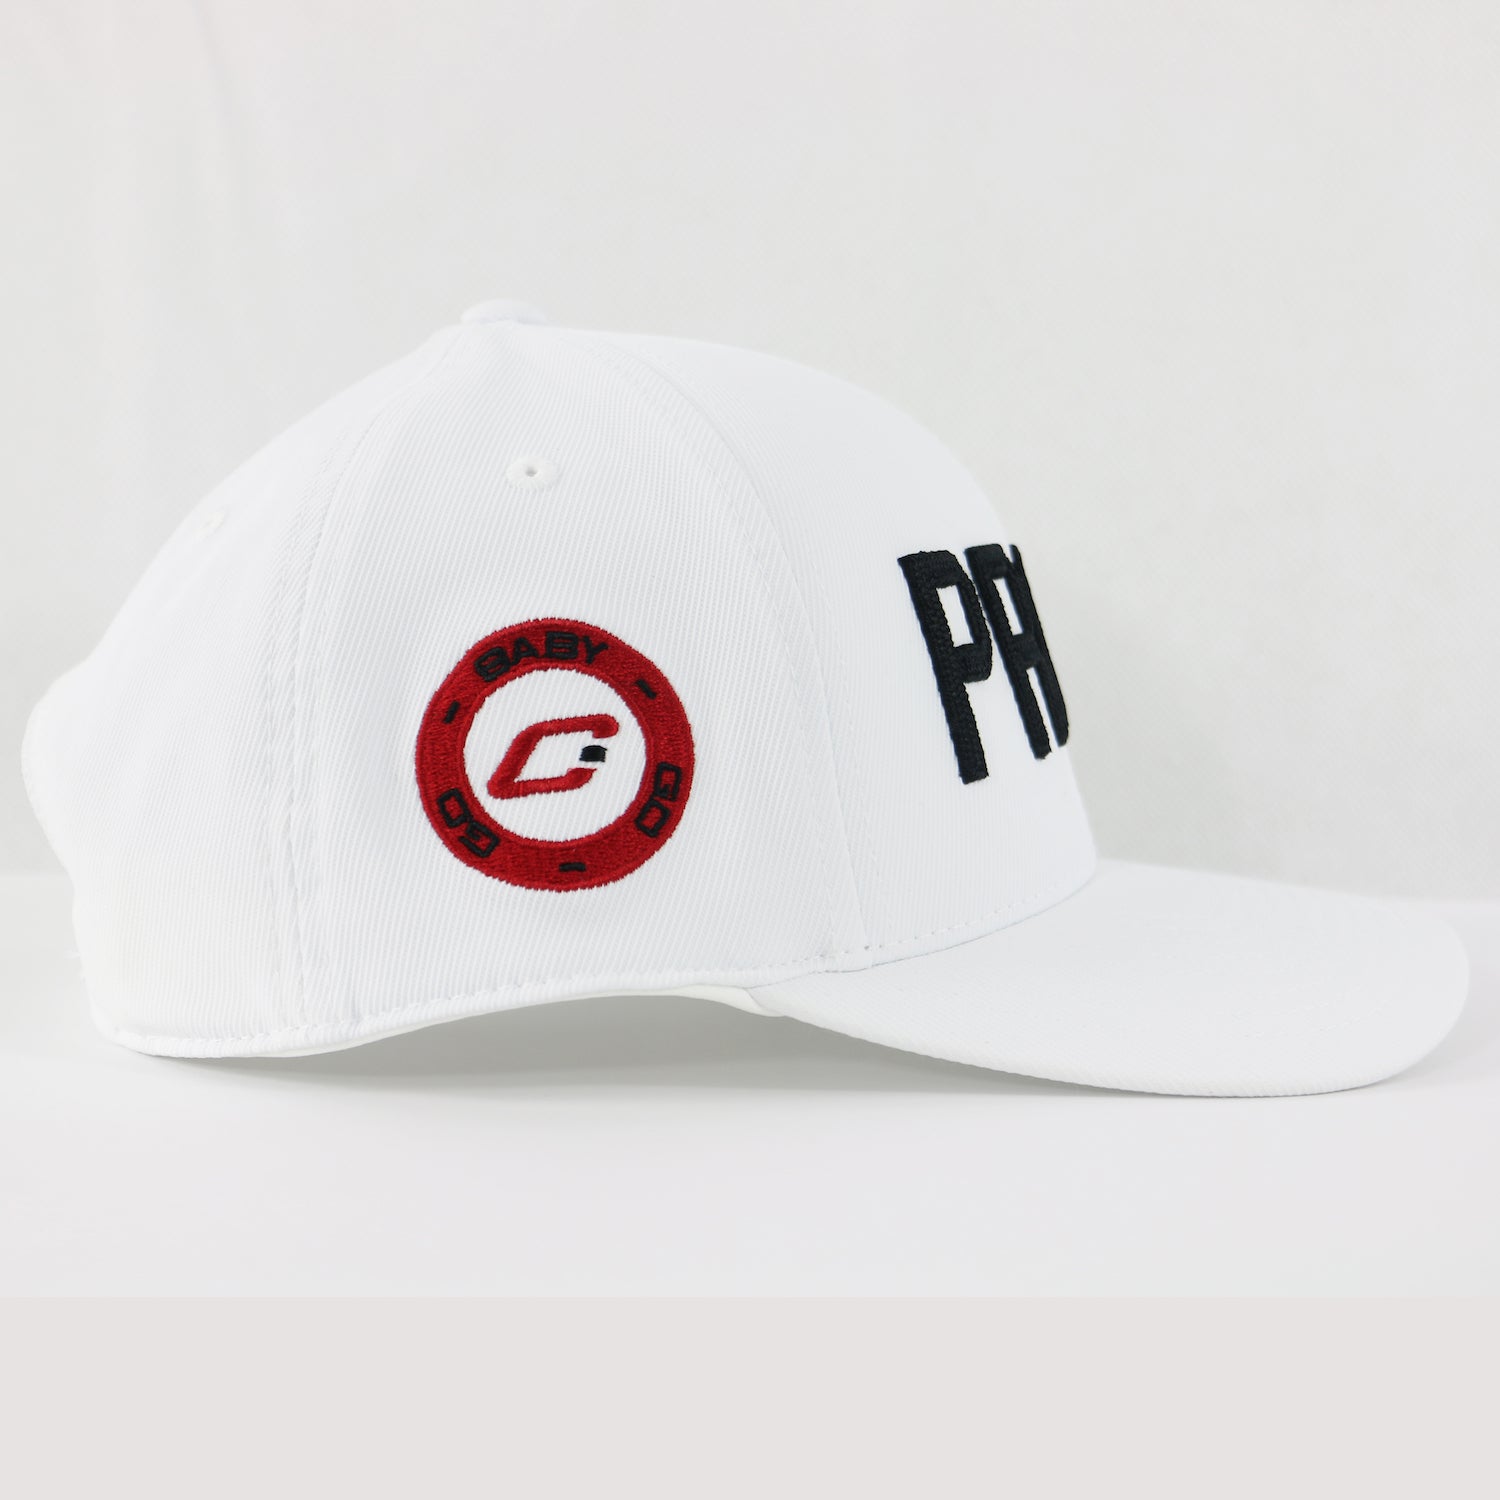 G/FORE×Protoconcept Cap - 41